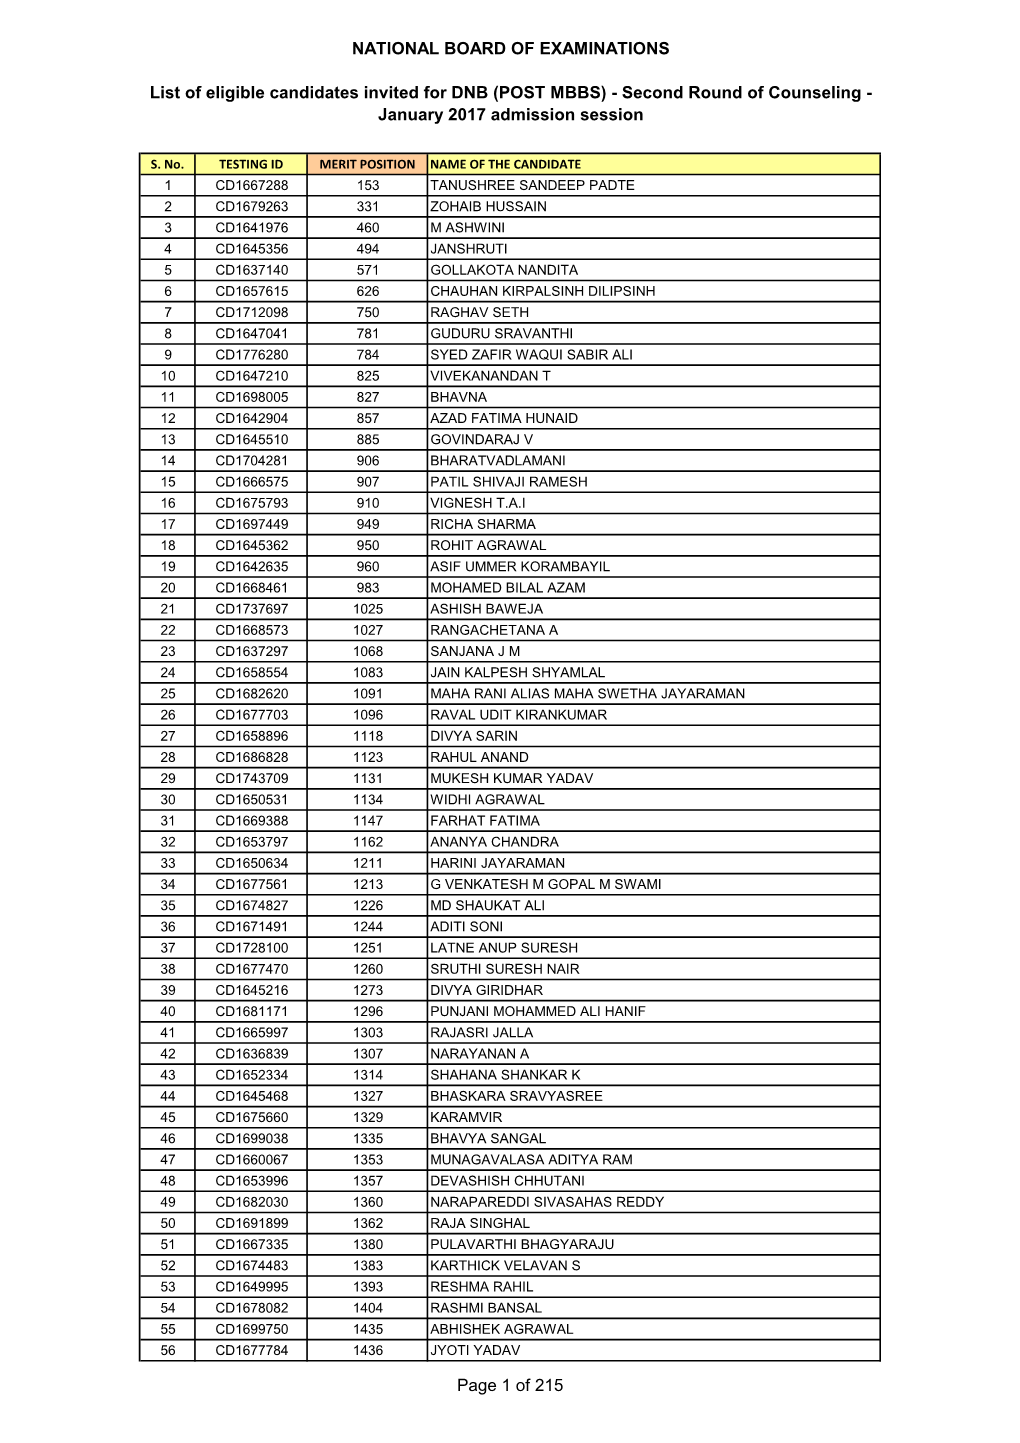 NATIONAL BOARD of EXAMINATIONS List of Eligible